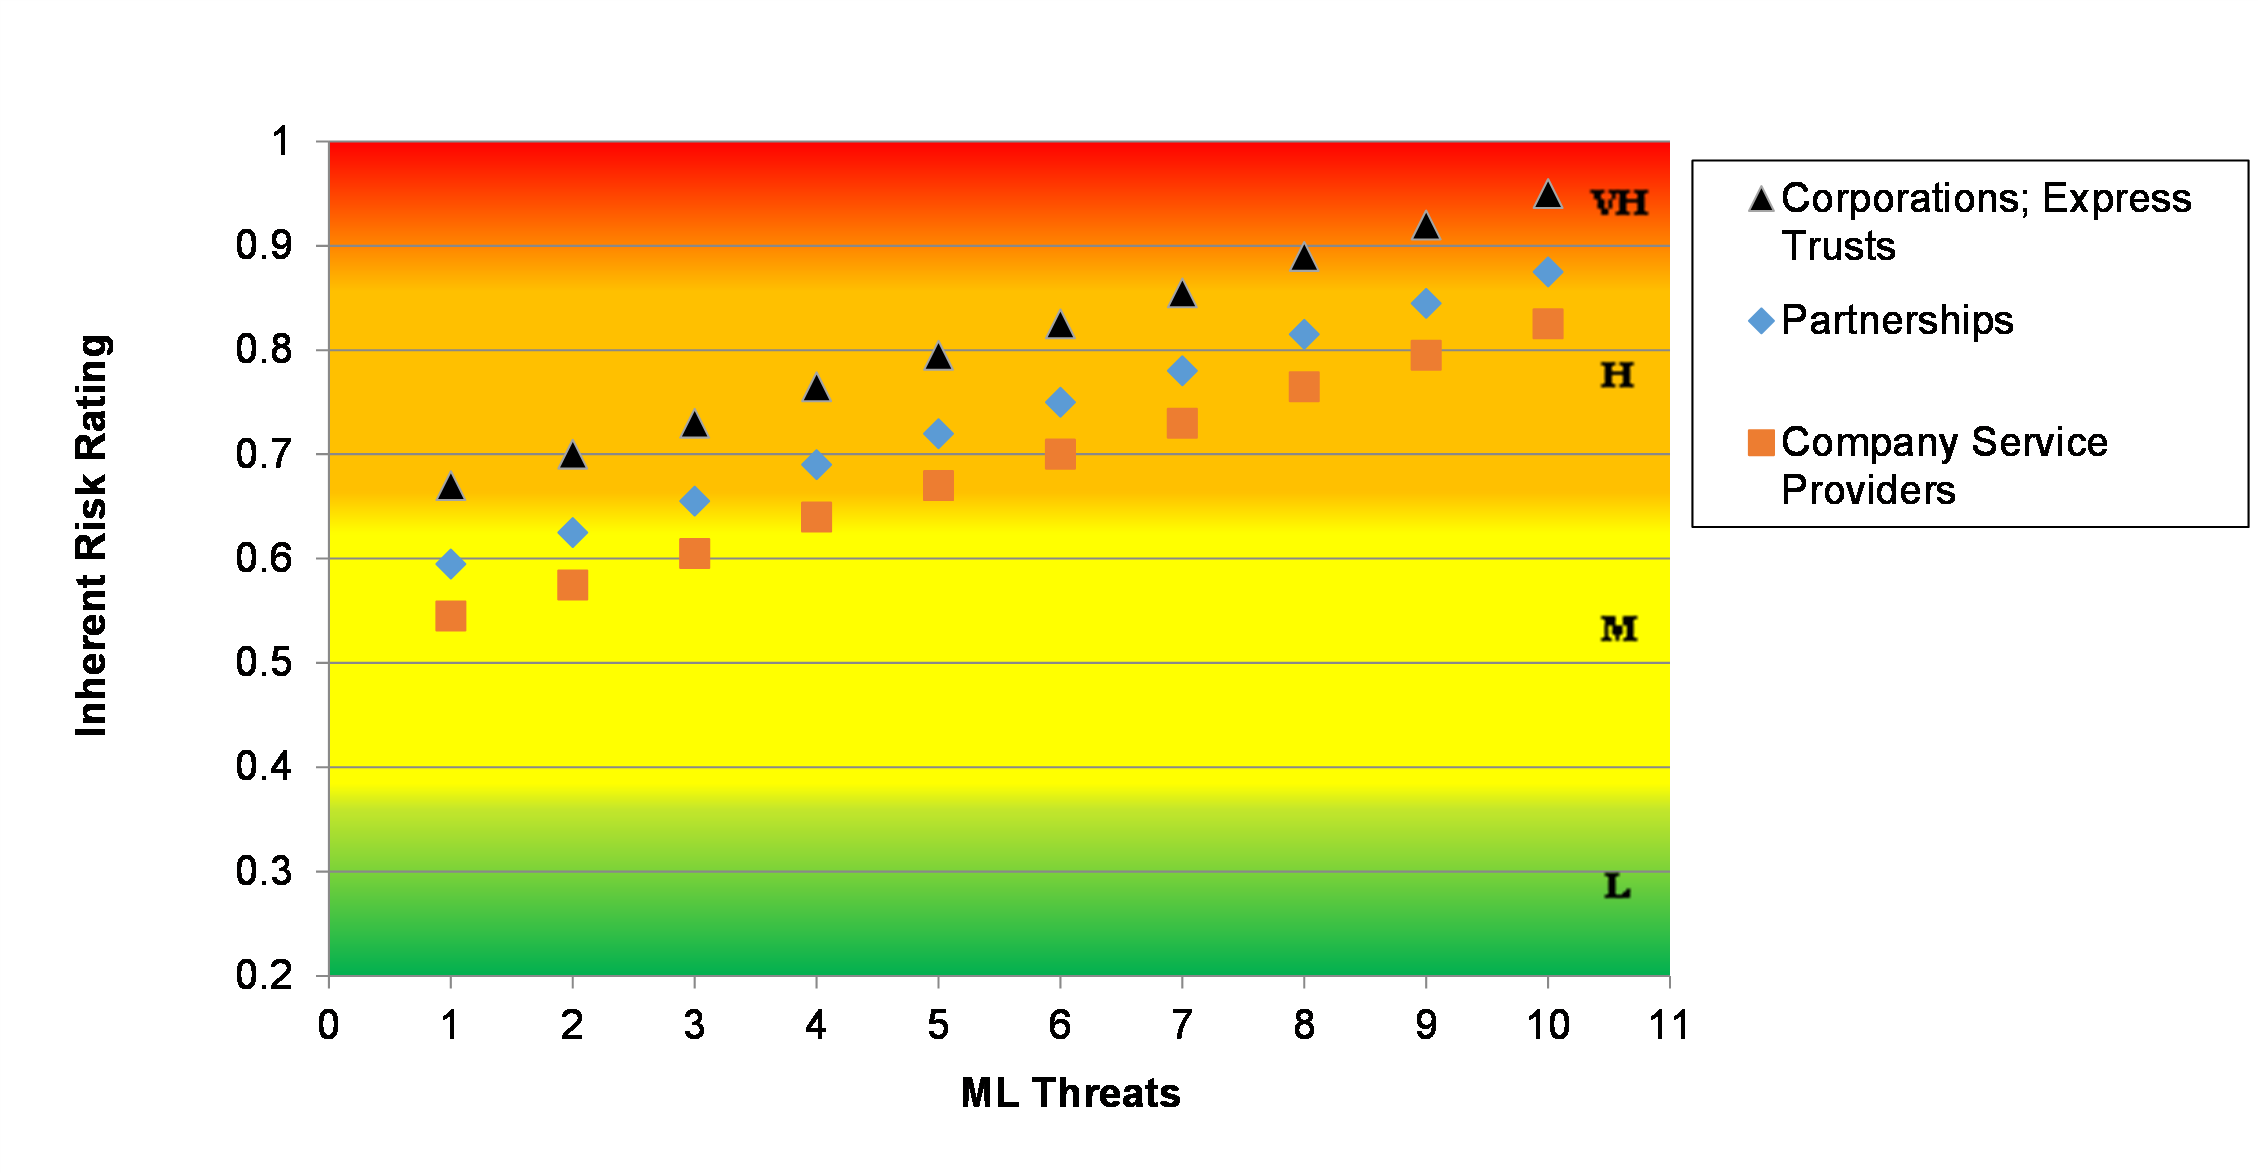 Figure 6: Inherent ML Risks related to Corporations, Partnerships, Express Trusts, and Company Services Providers by Type of ML Threats